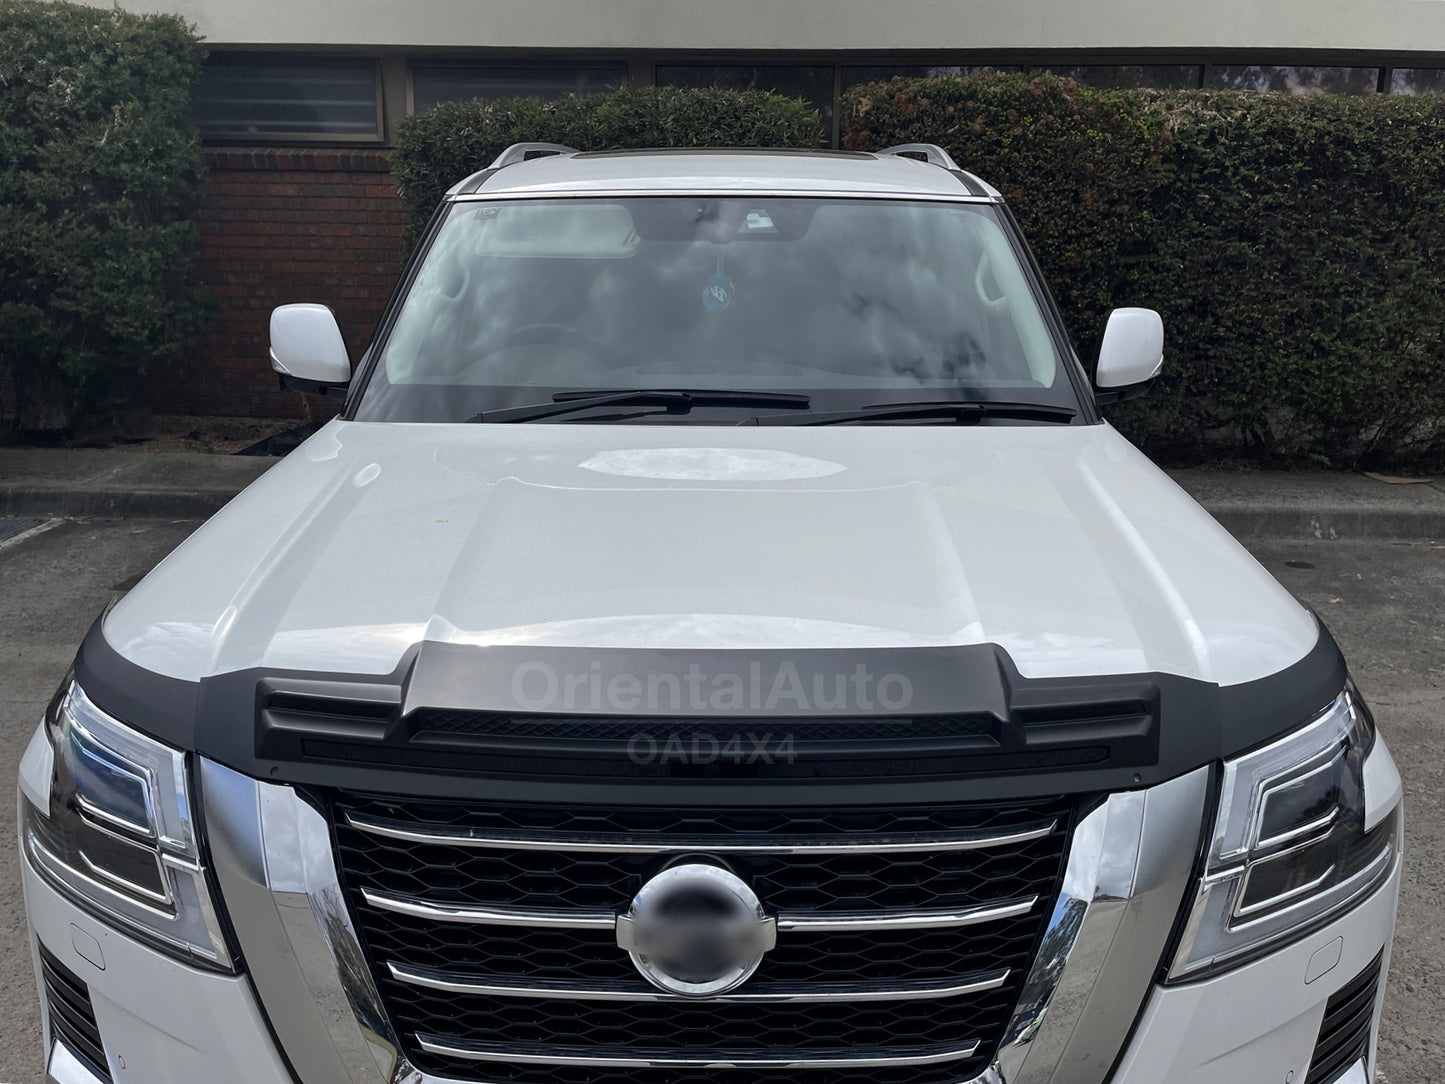 Injection Modeling Exclusive Bonnet Protector for Nissan Patrol Y62 Series 5 2019-Onwards Hood Protector Bonnet Guard